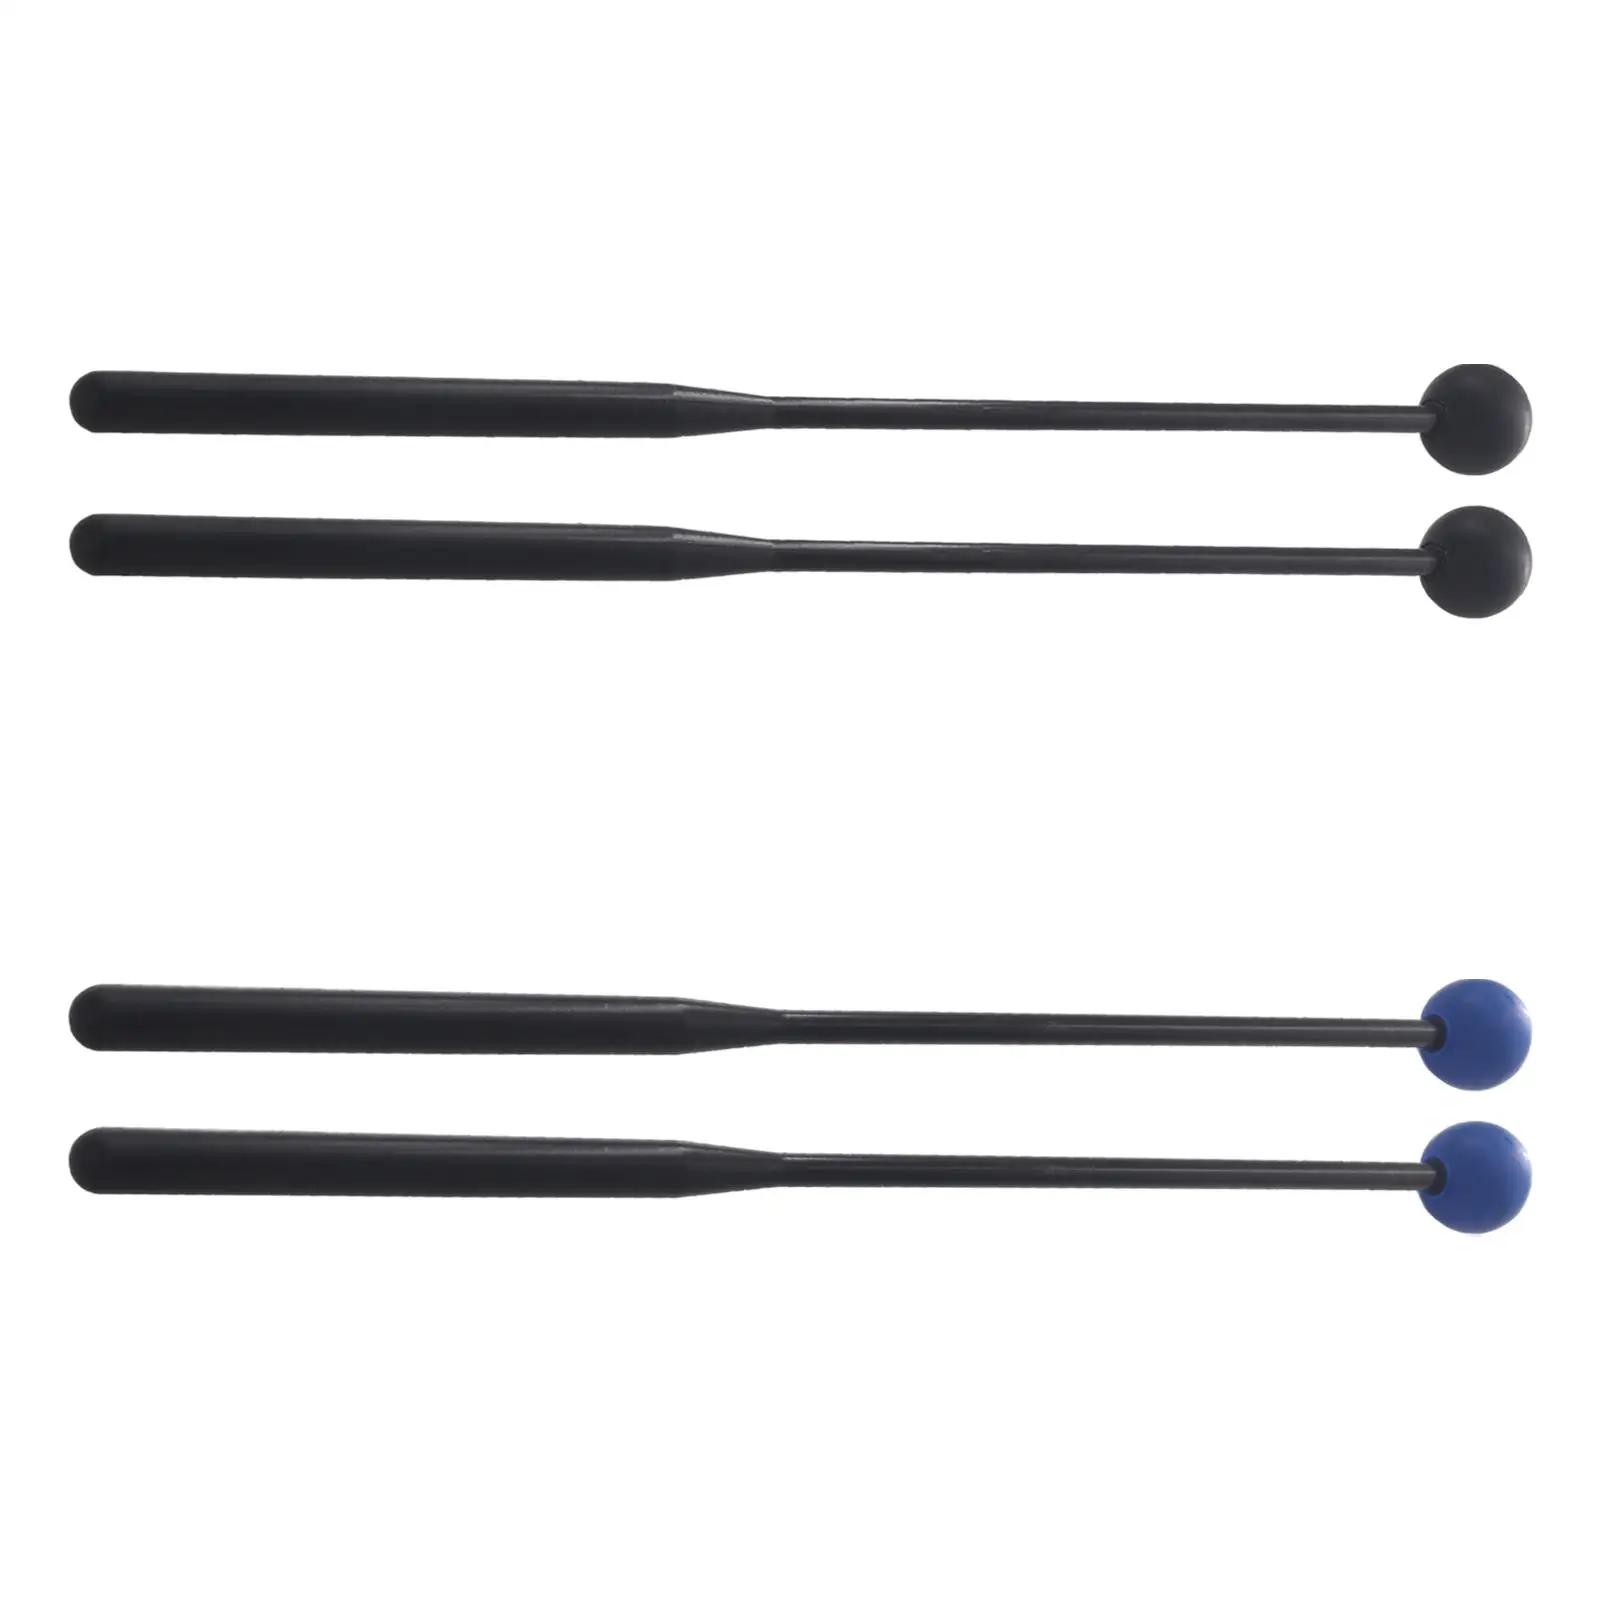 2x Percussion Xylophone Mallets 12`` for Timpani Music Education Meditation